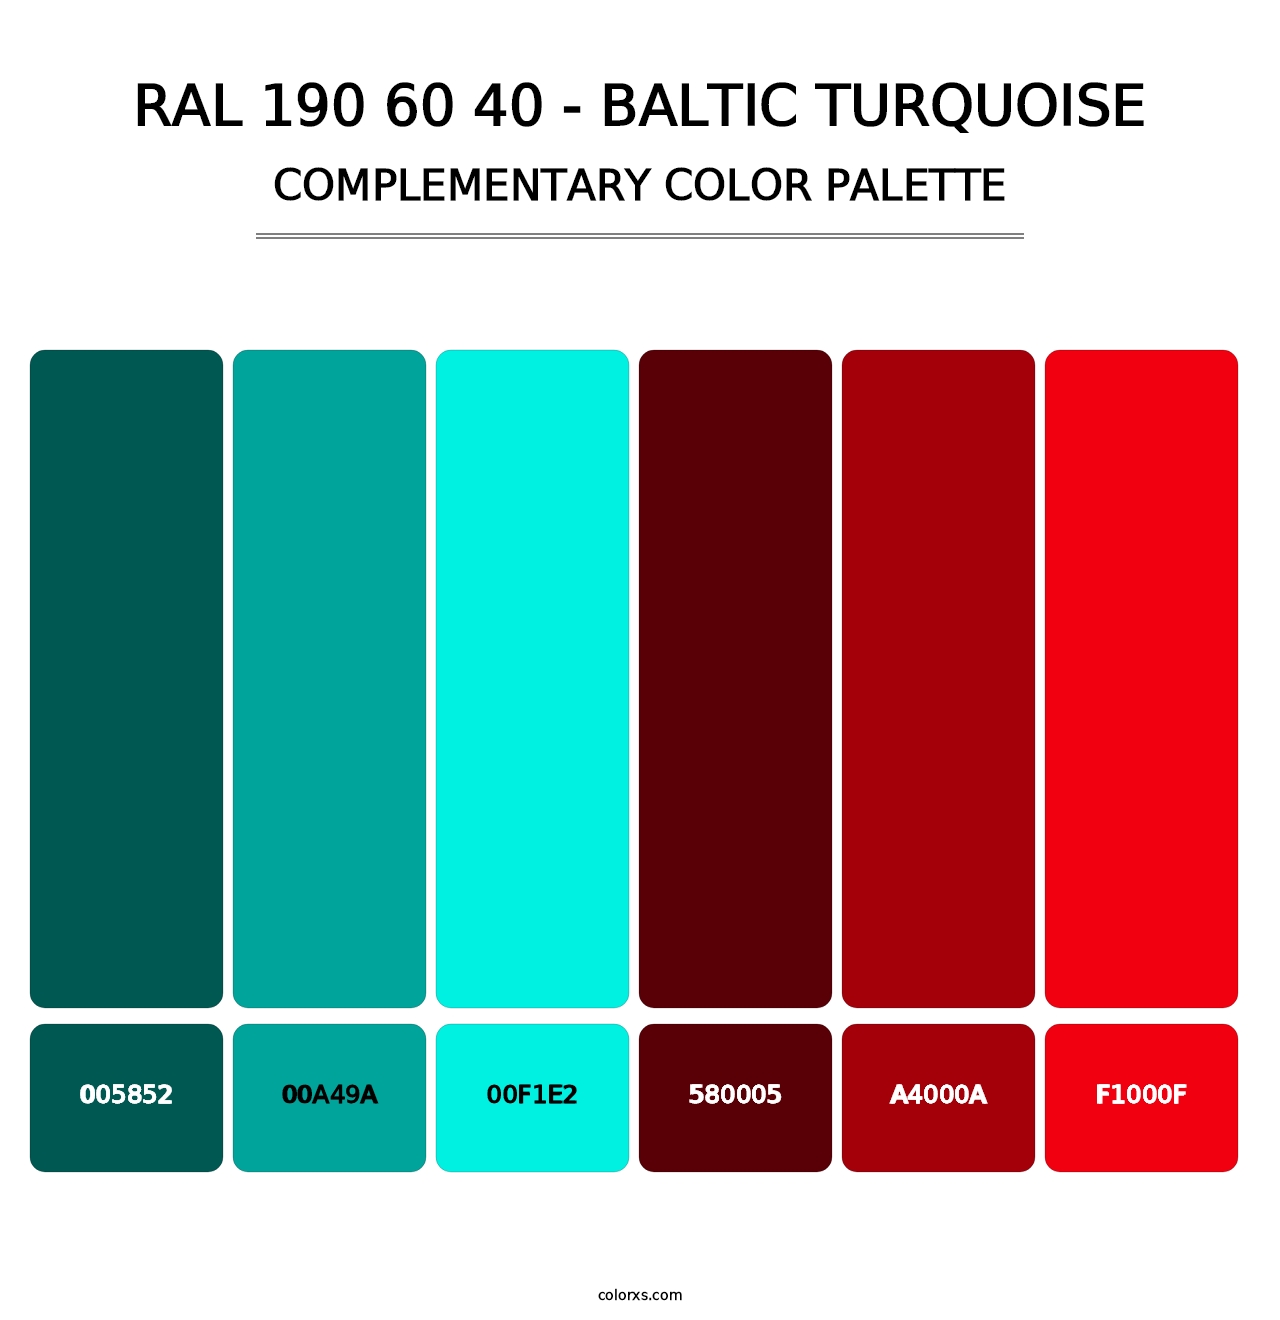 RAL 190 60 40 - Baltic Turquoise - Complementary Color Palette